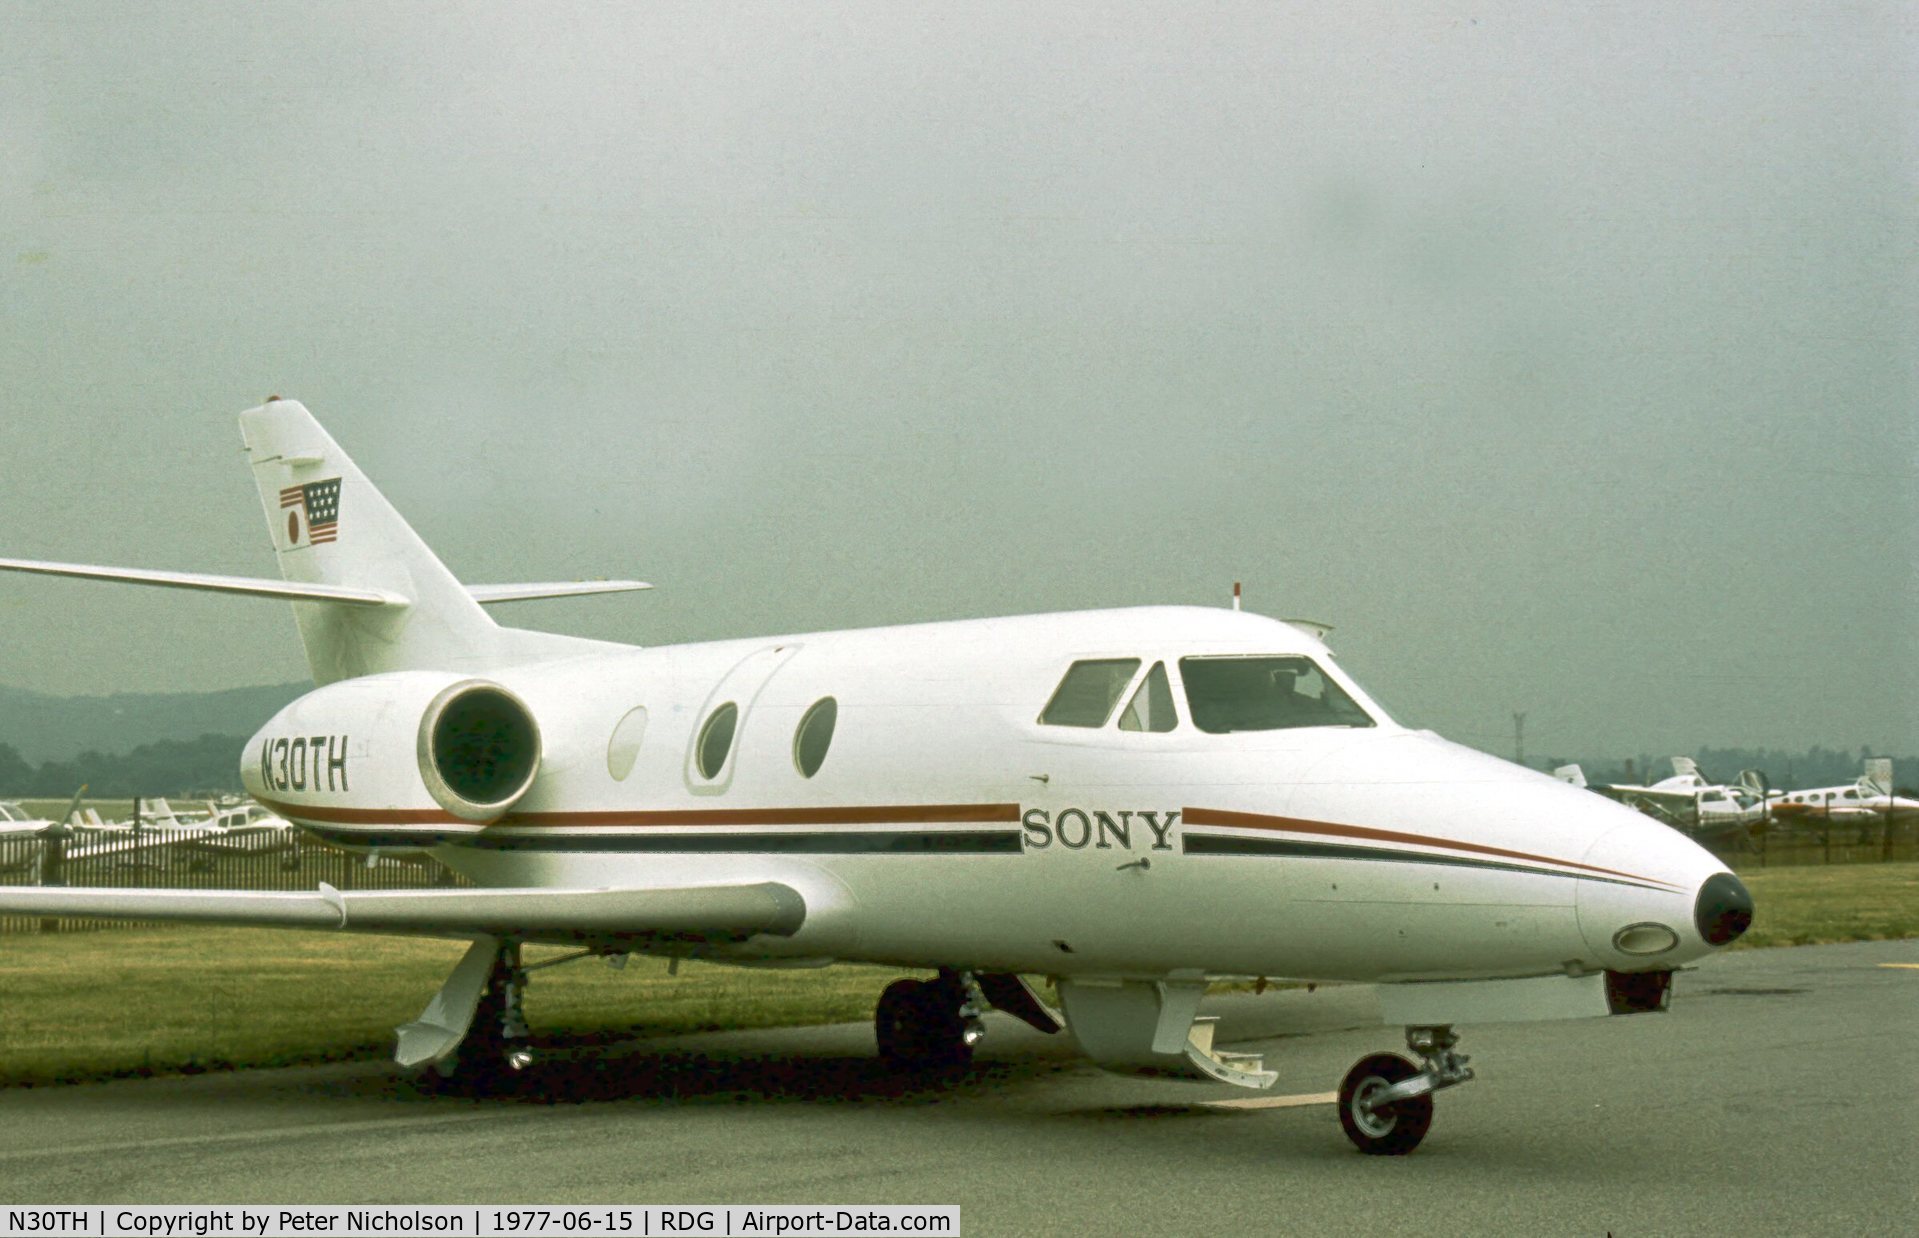 N30TH, 1974 Dassault Falcon 10 C/N 36, This Sony Corporation Falcon 10 was displayed at the 1977 Reading Airshow.